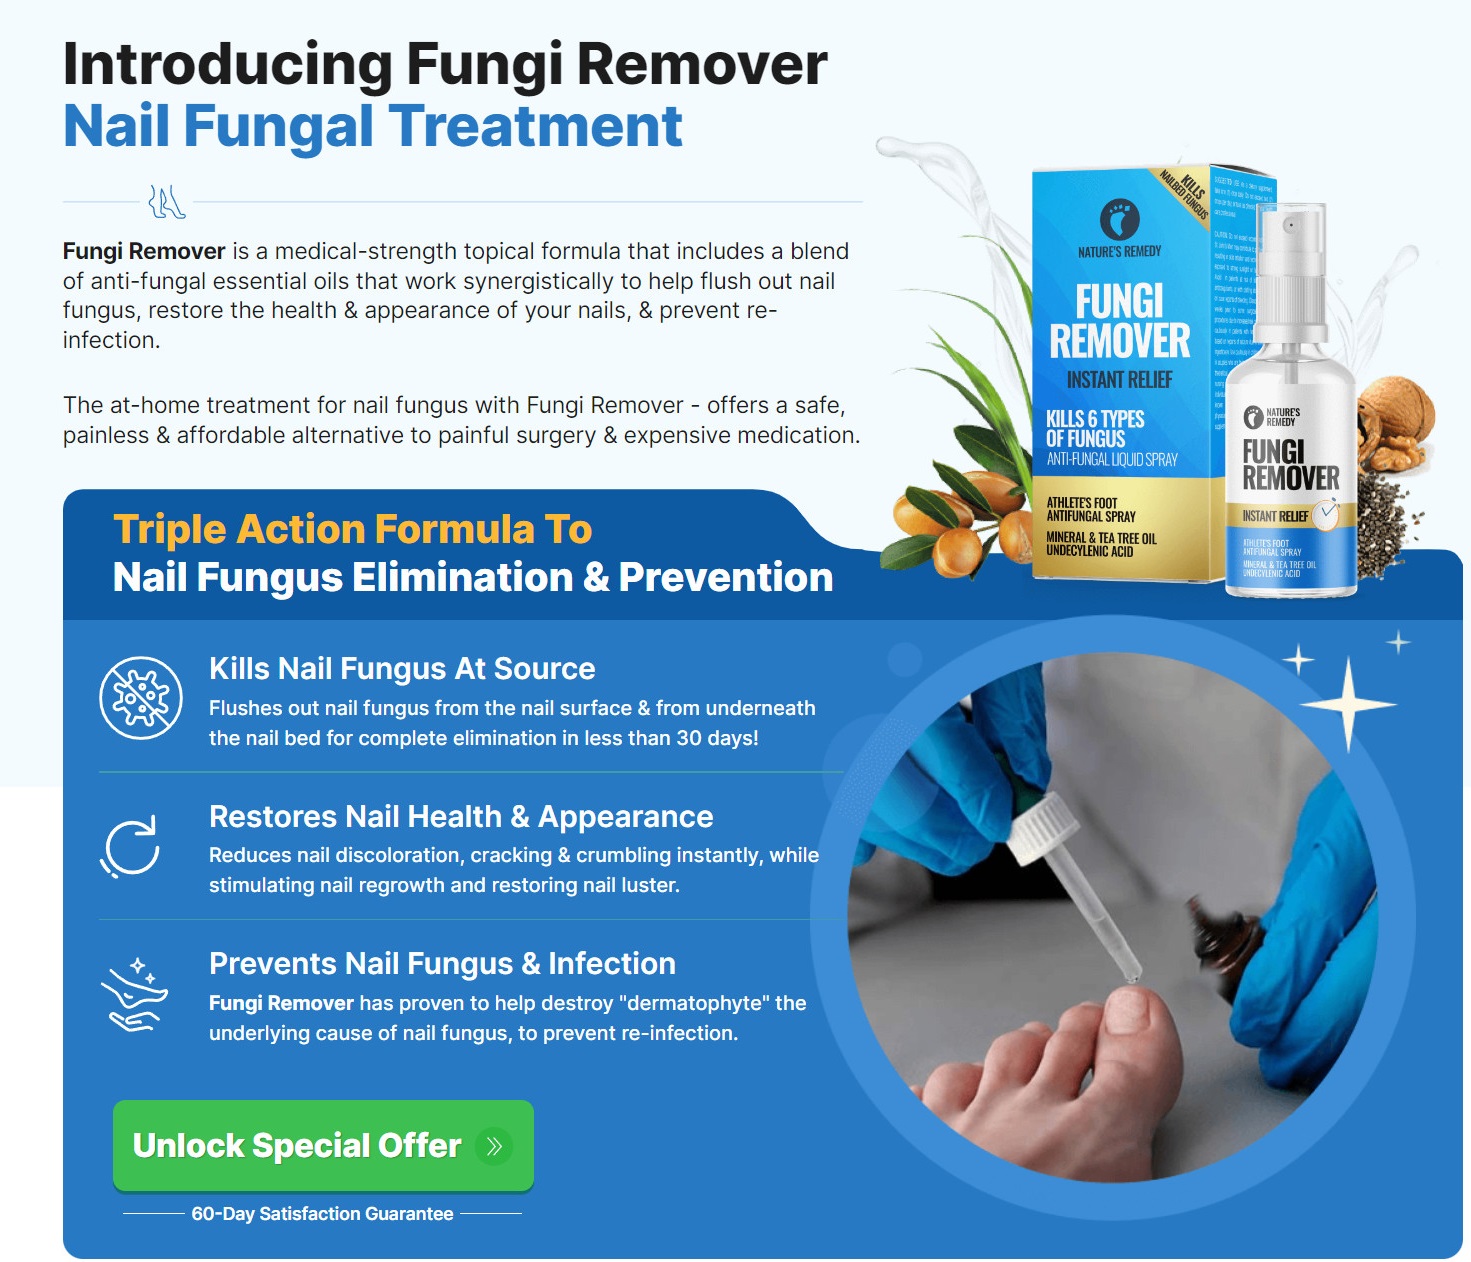 Natures Remedy Fungi Remover AU, NZ